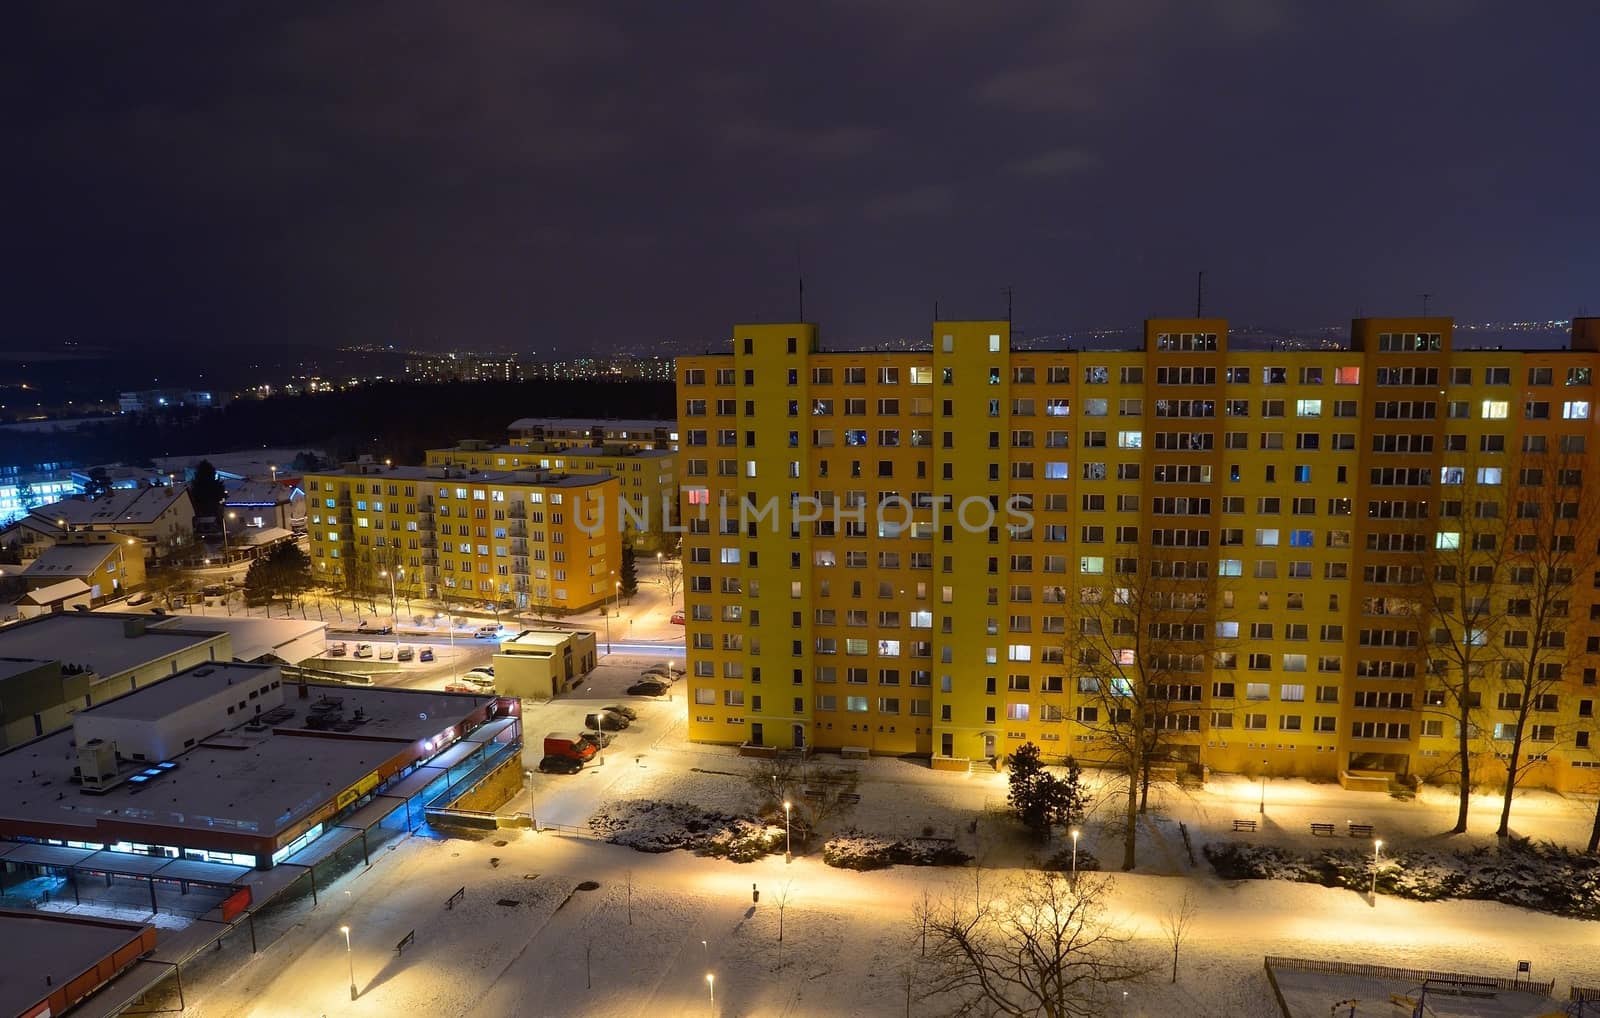 Communist residential blocks and houses at night.